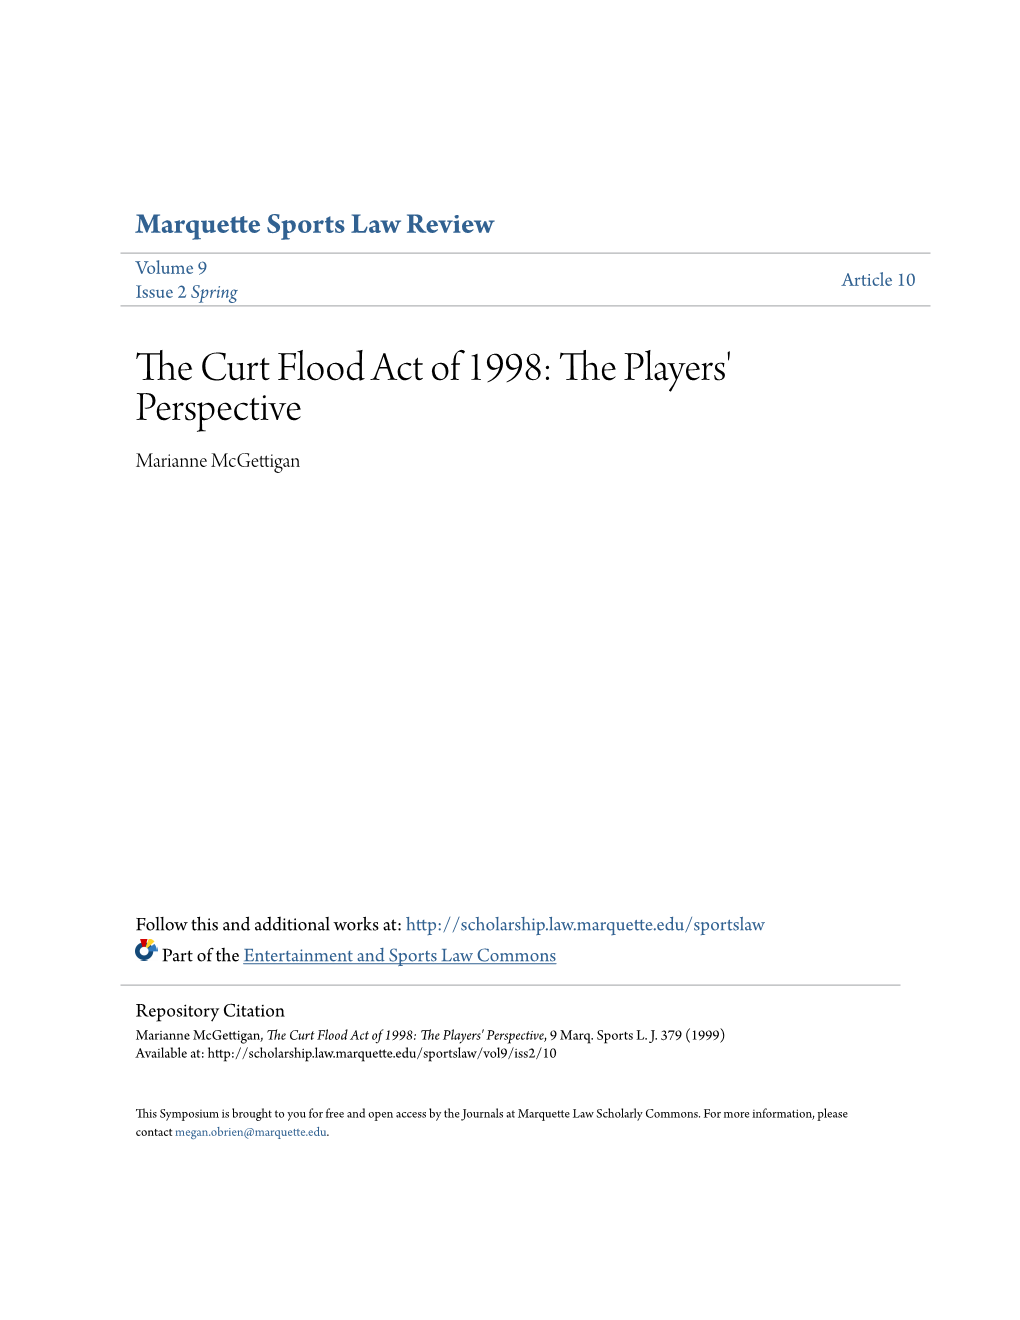 The Curt Flood Act of 1998: the Players' Perspective, 9 Marq